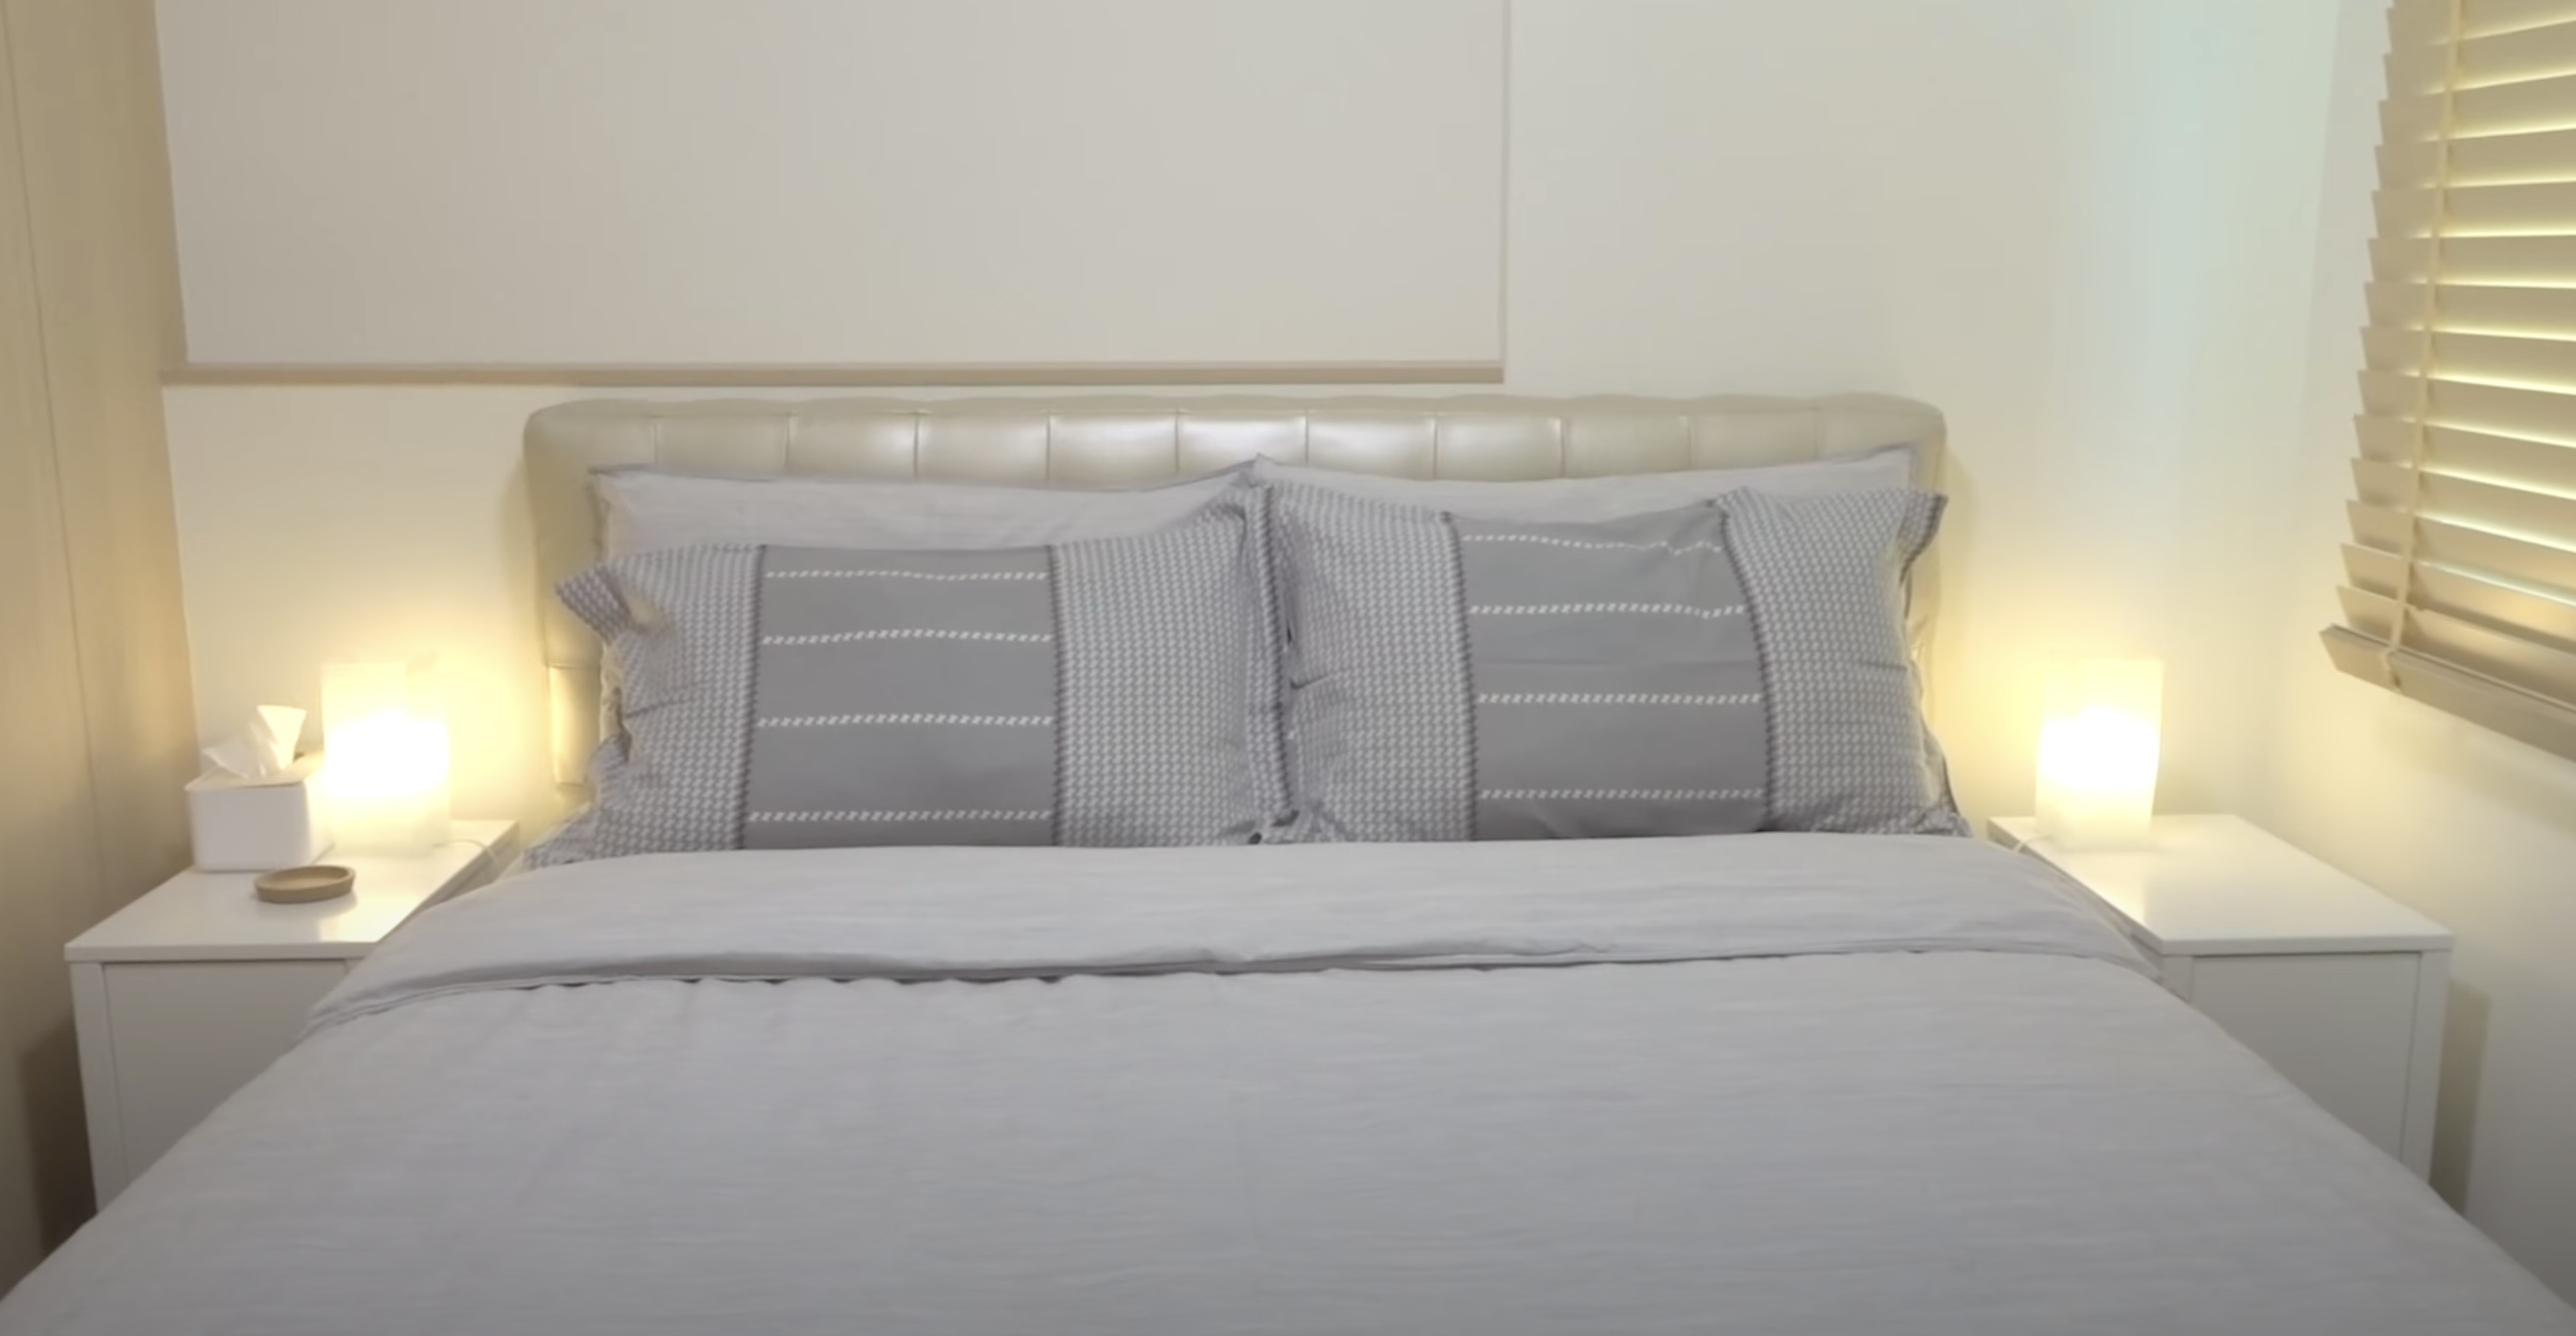 How To Make A Duvet Cover Stay In Place